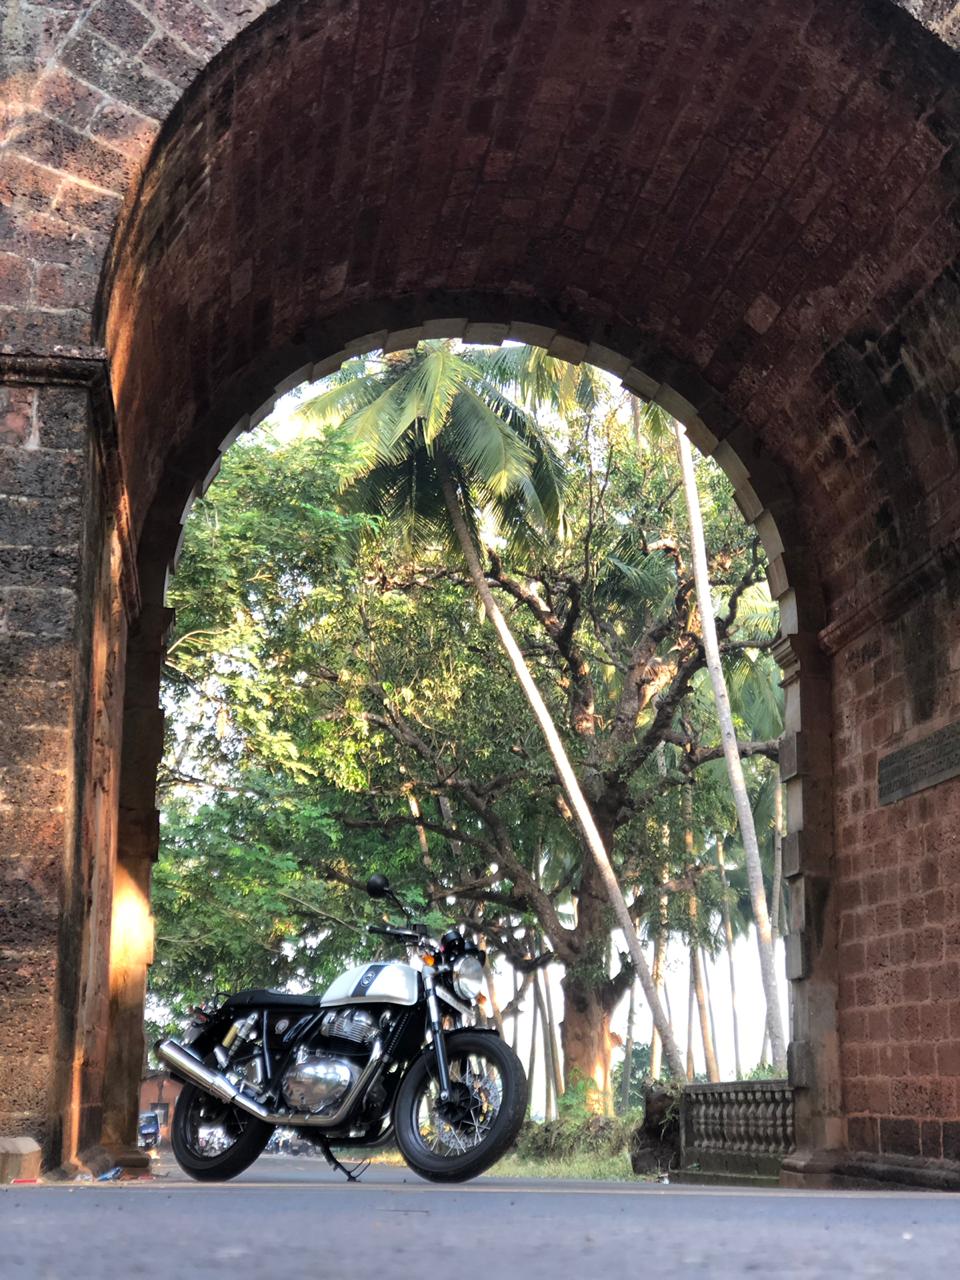 <p>Siddhartha Lal&nbsp;says that Royal Enfield&#39;s process for developing and making motorcycles &ldquo;had completely metamorphosised&rdquo; so that &ldquo;truly global&rdquo; #motorcycles can be made, in the run up to the #650Twins launch</p>